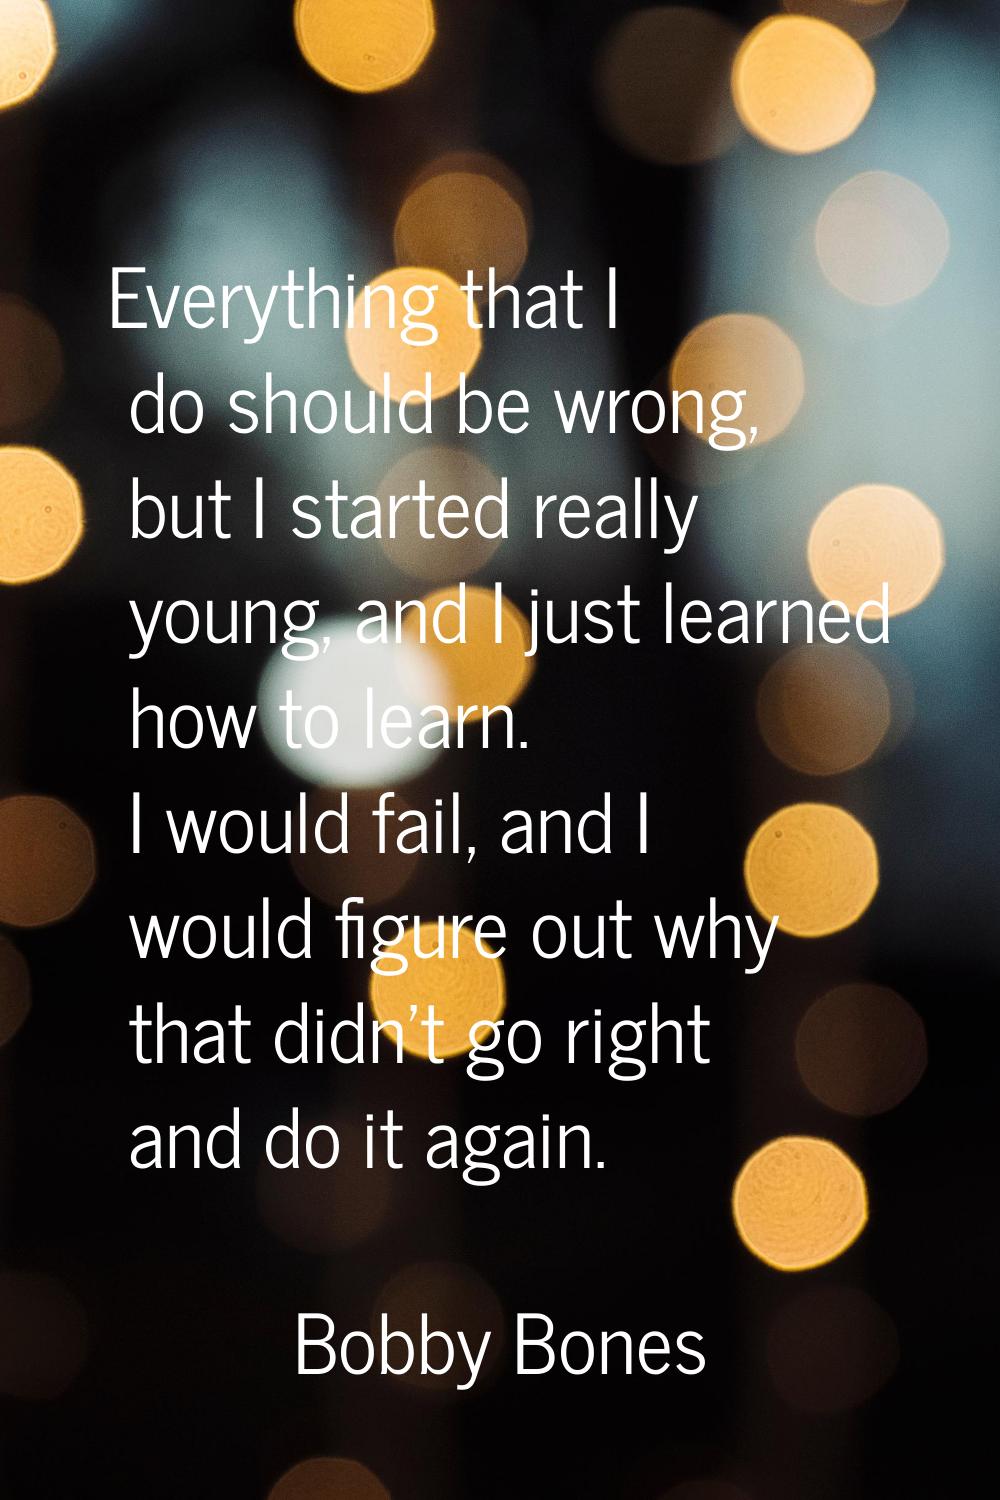 Everything that I do should be wrong, but I started really young, and I just learned how to learn. 